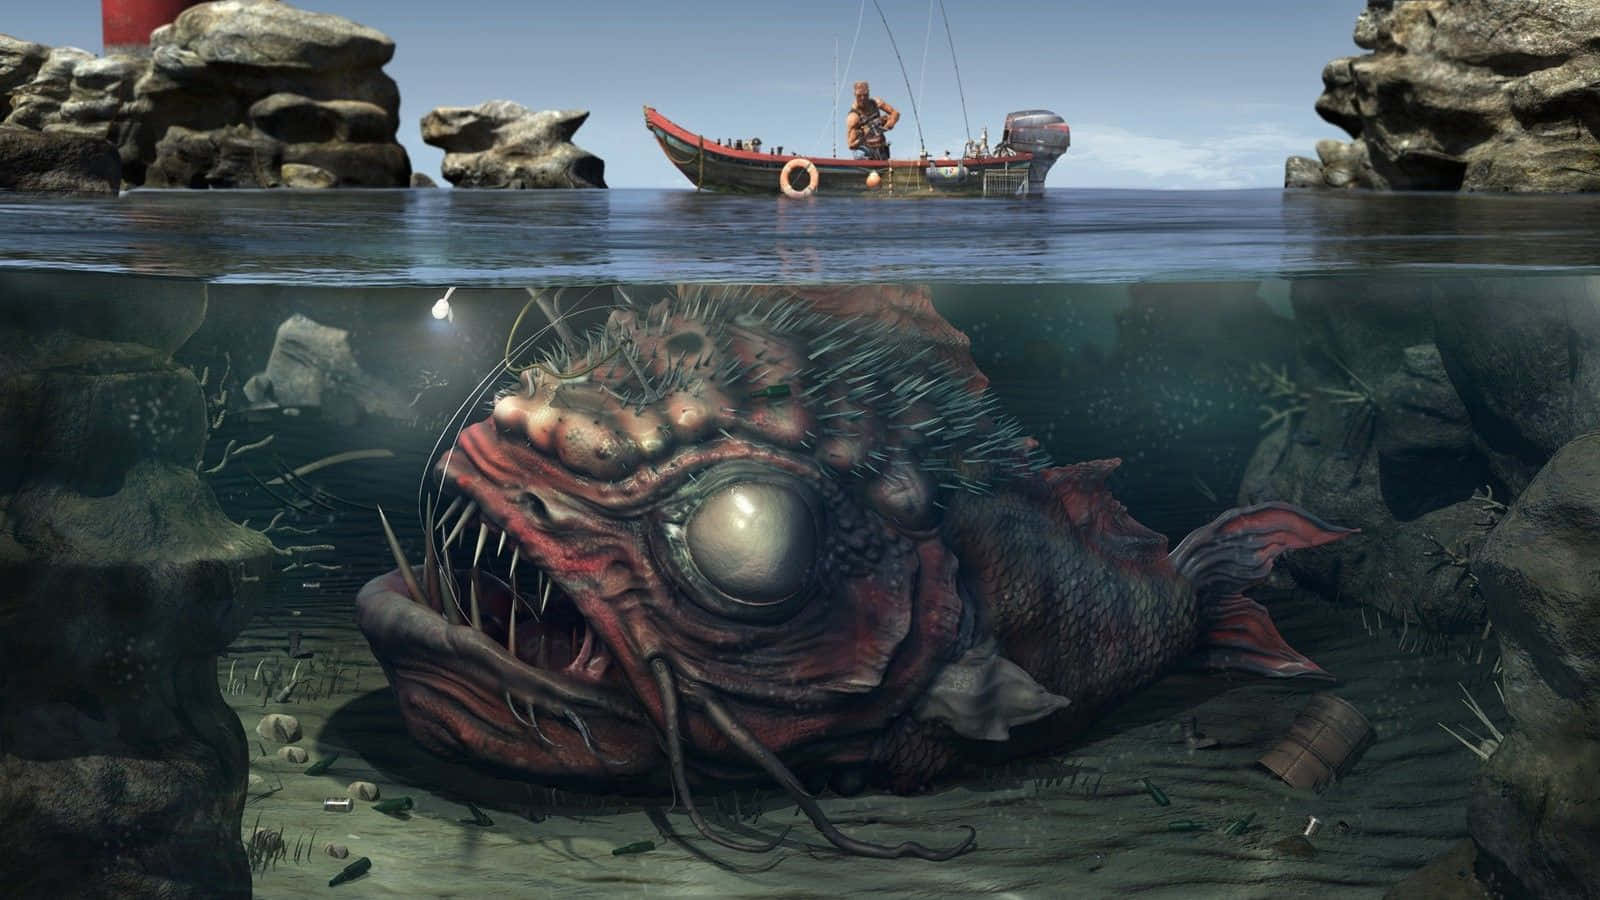 Anglerfish Under The Boat Scary Ocean [picture]